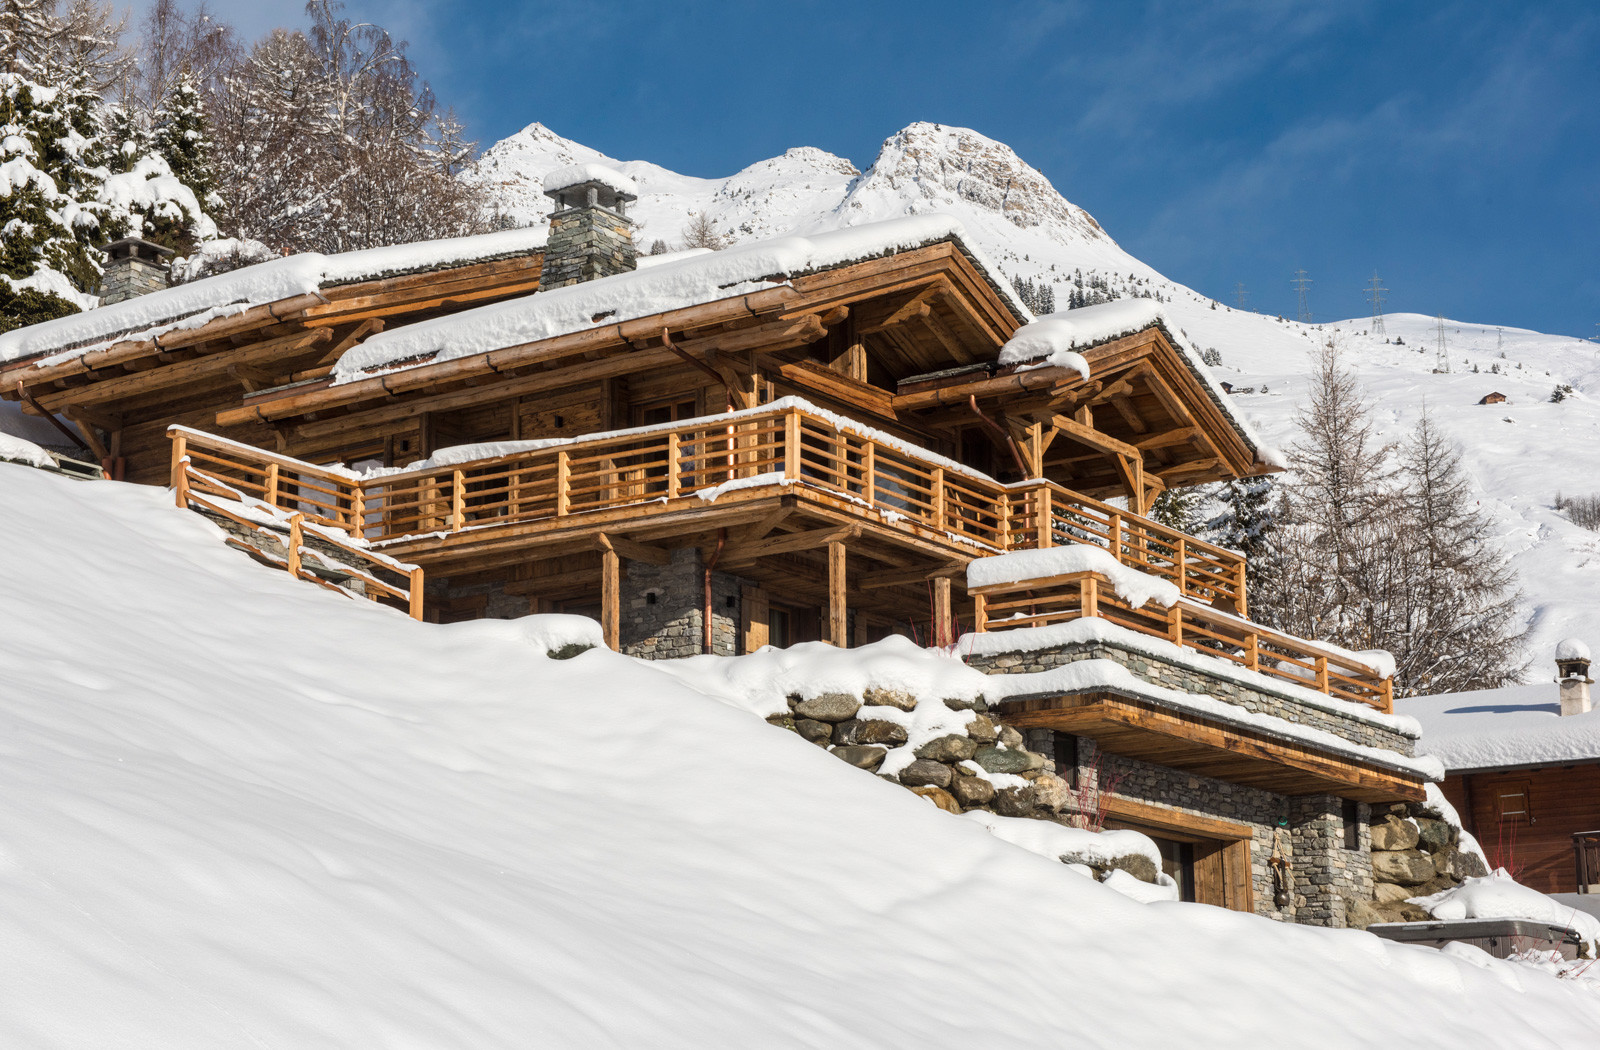 Kings-avenue-verbier-snow-chalet-childfriendly-parking-wine-cave-fireplace-018-1